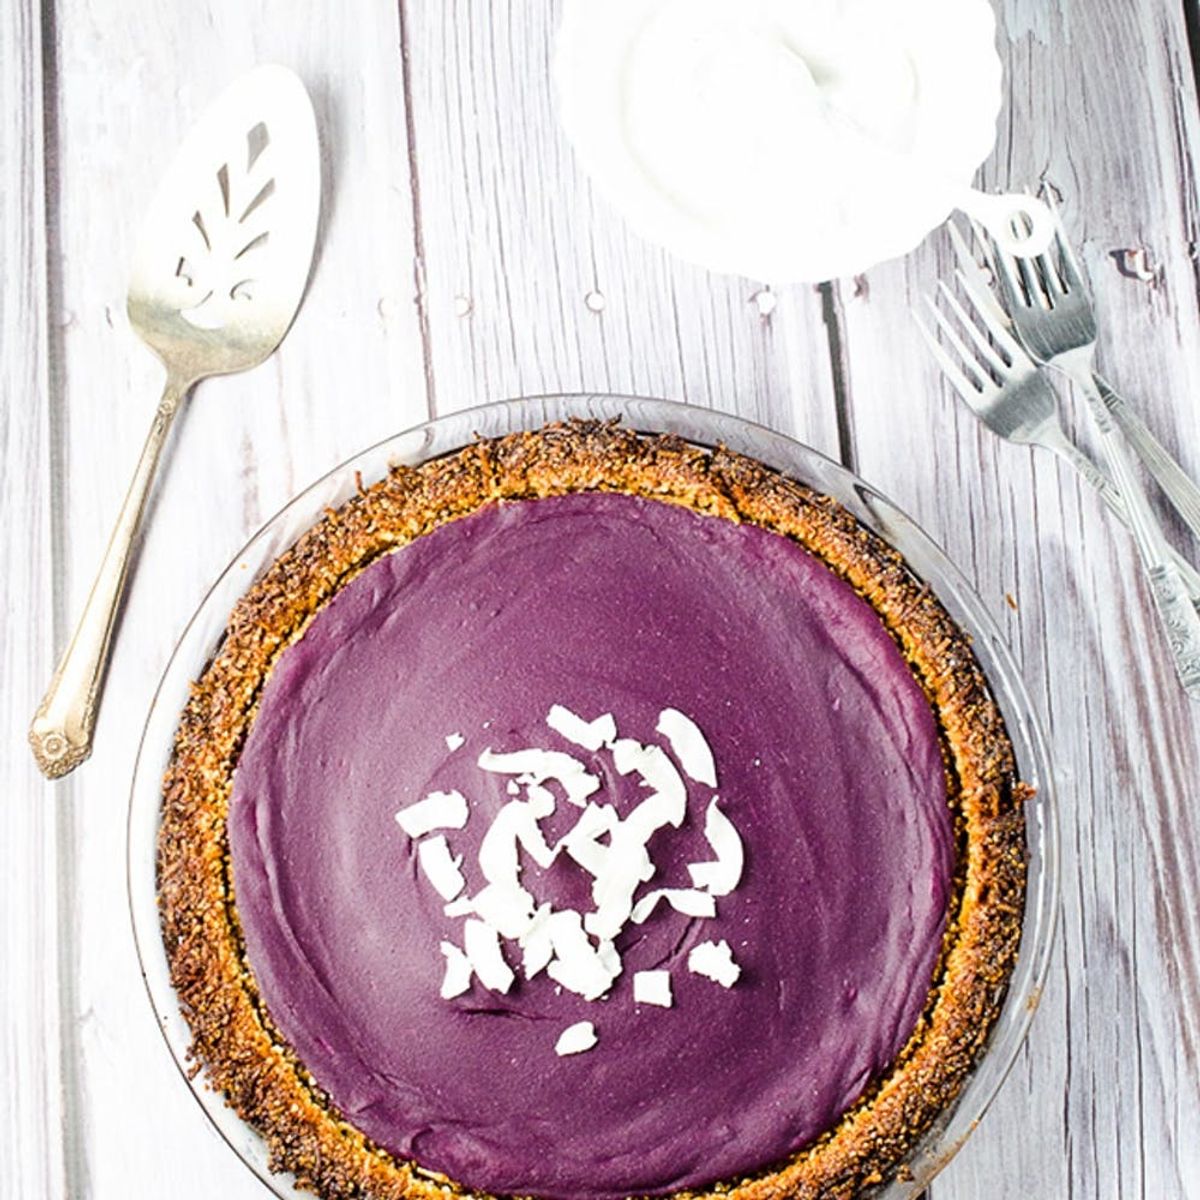 19 Sweet Potato Pie Recipes You Haven’t Tried Before